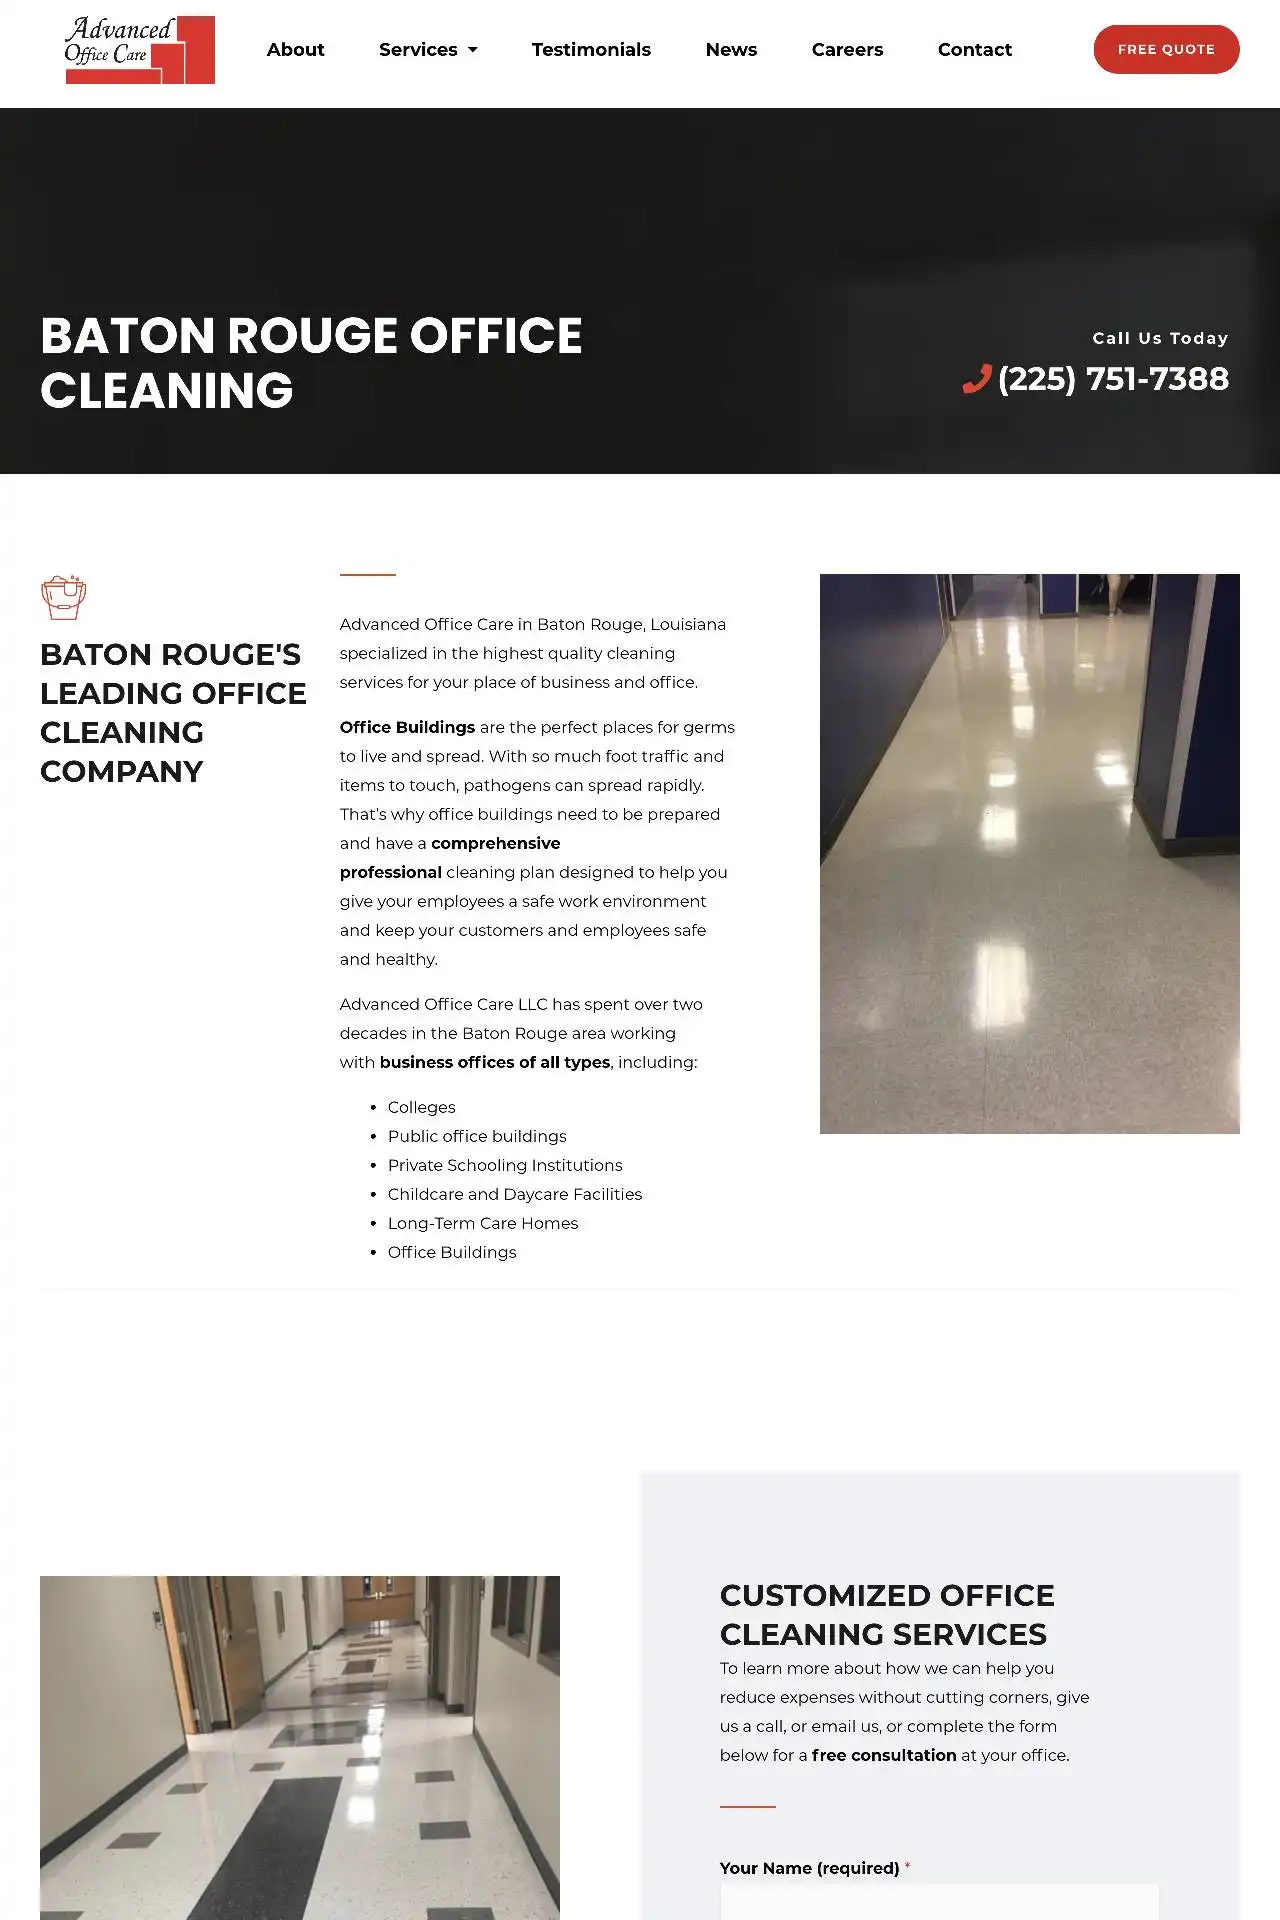 baton rouge cleaning company website design development https aocla.com services baton rouge office cleaning